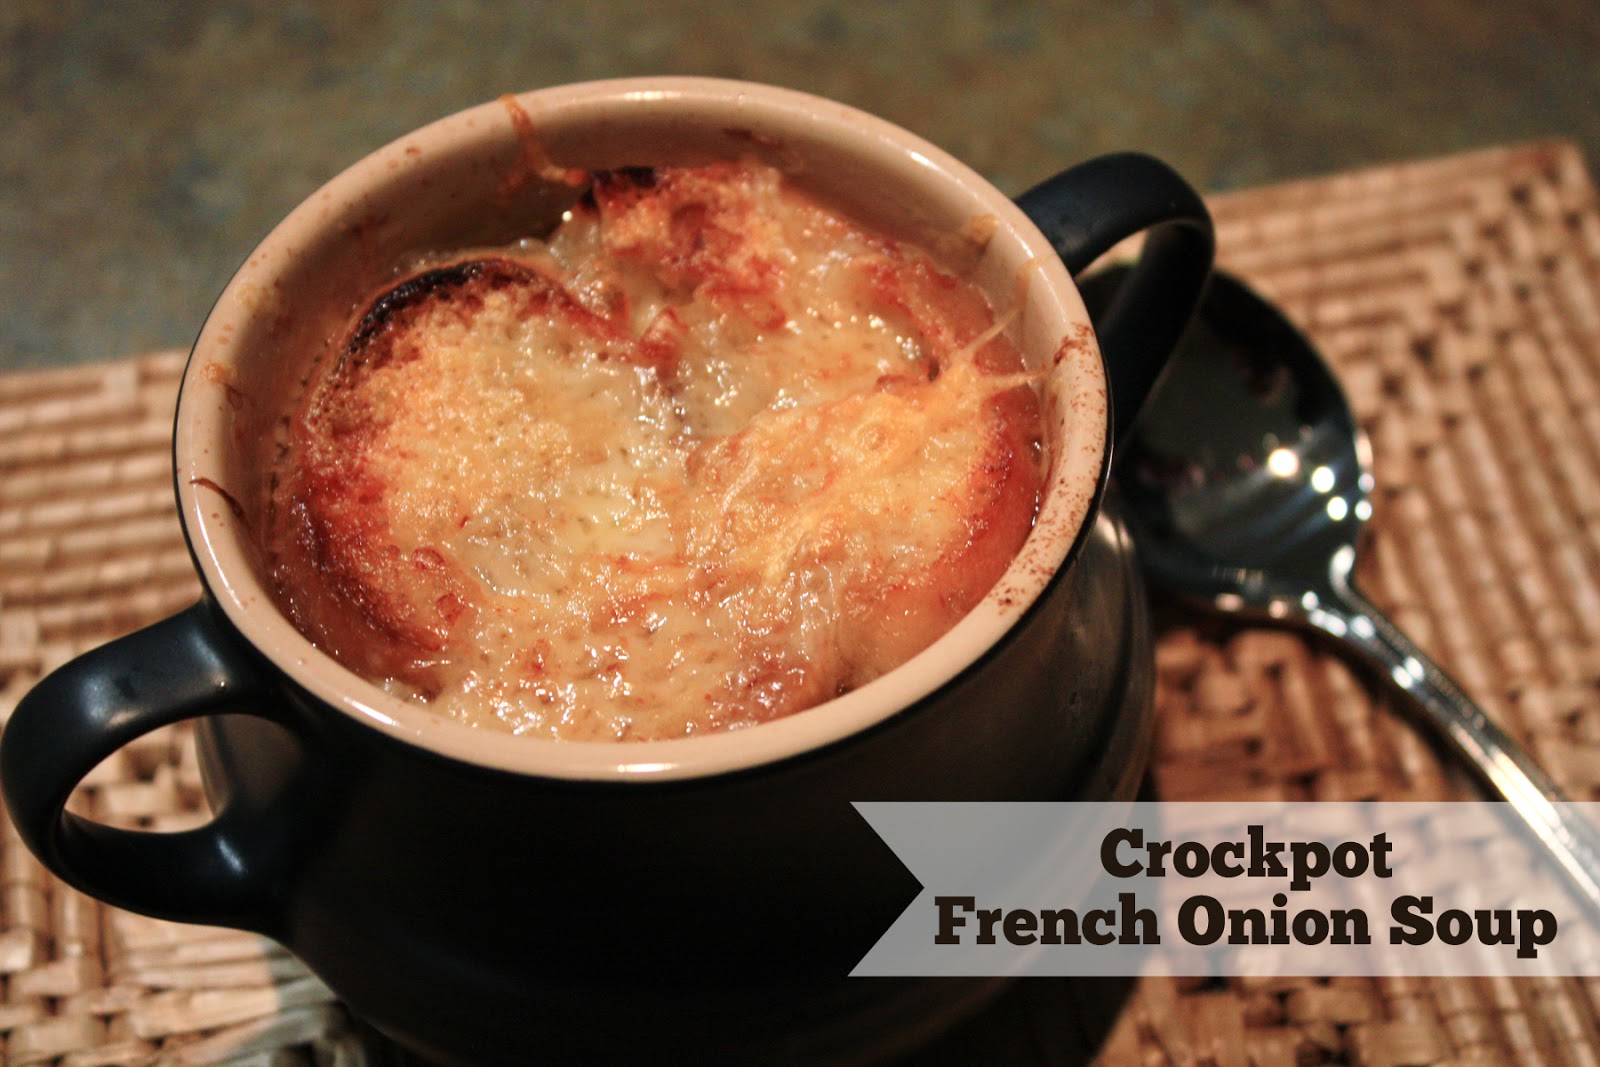 What happened next...: Crockpot French Onion Soup